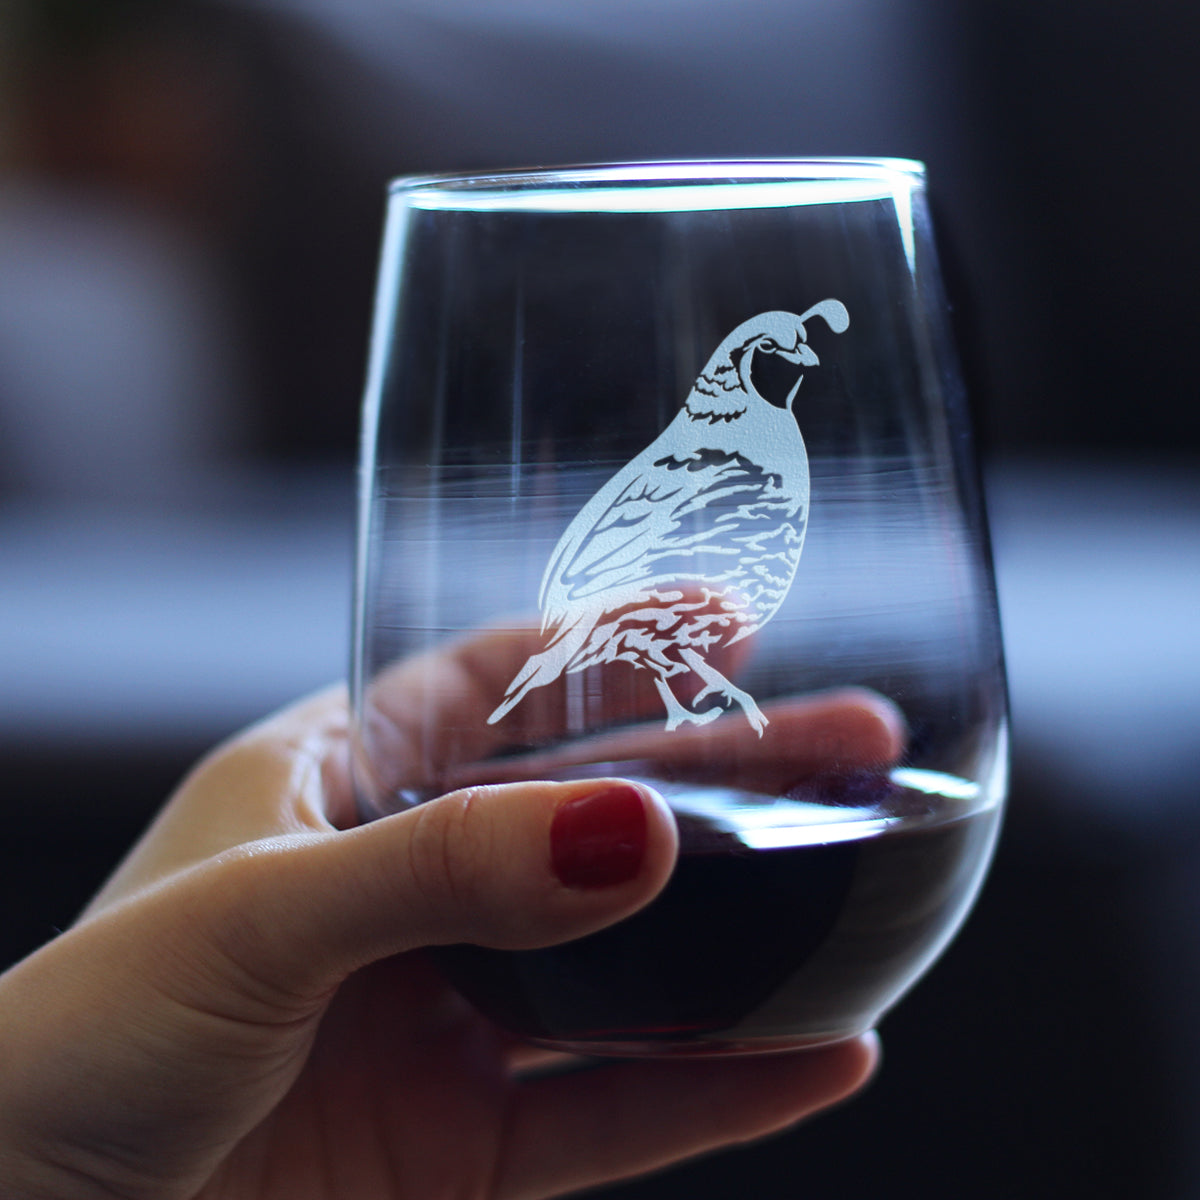 Quail Stemless Wine Glass - Fun Bird Themed Gifts and Decor for Men &amp; Women - Large 17 Oz Glasses